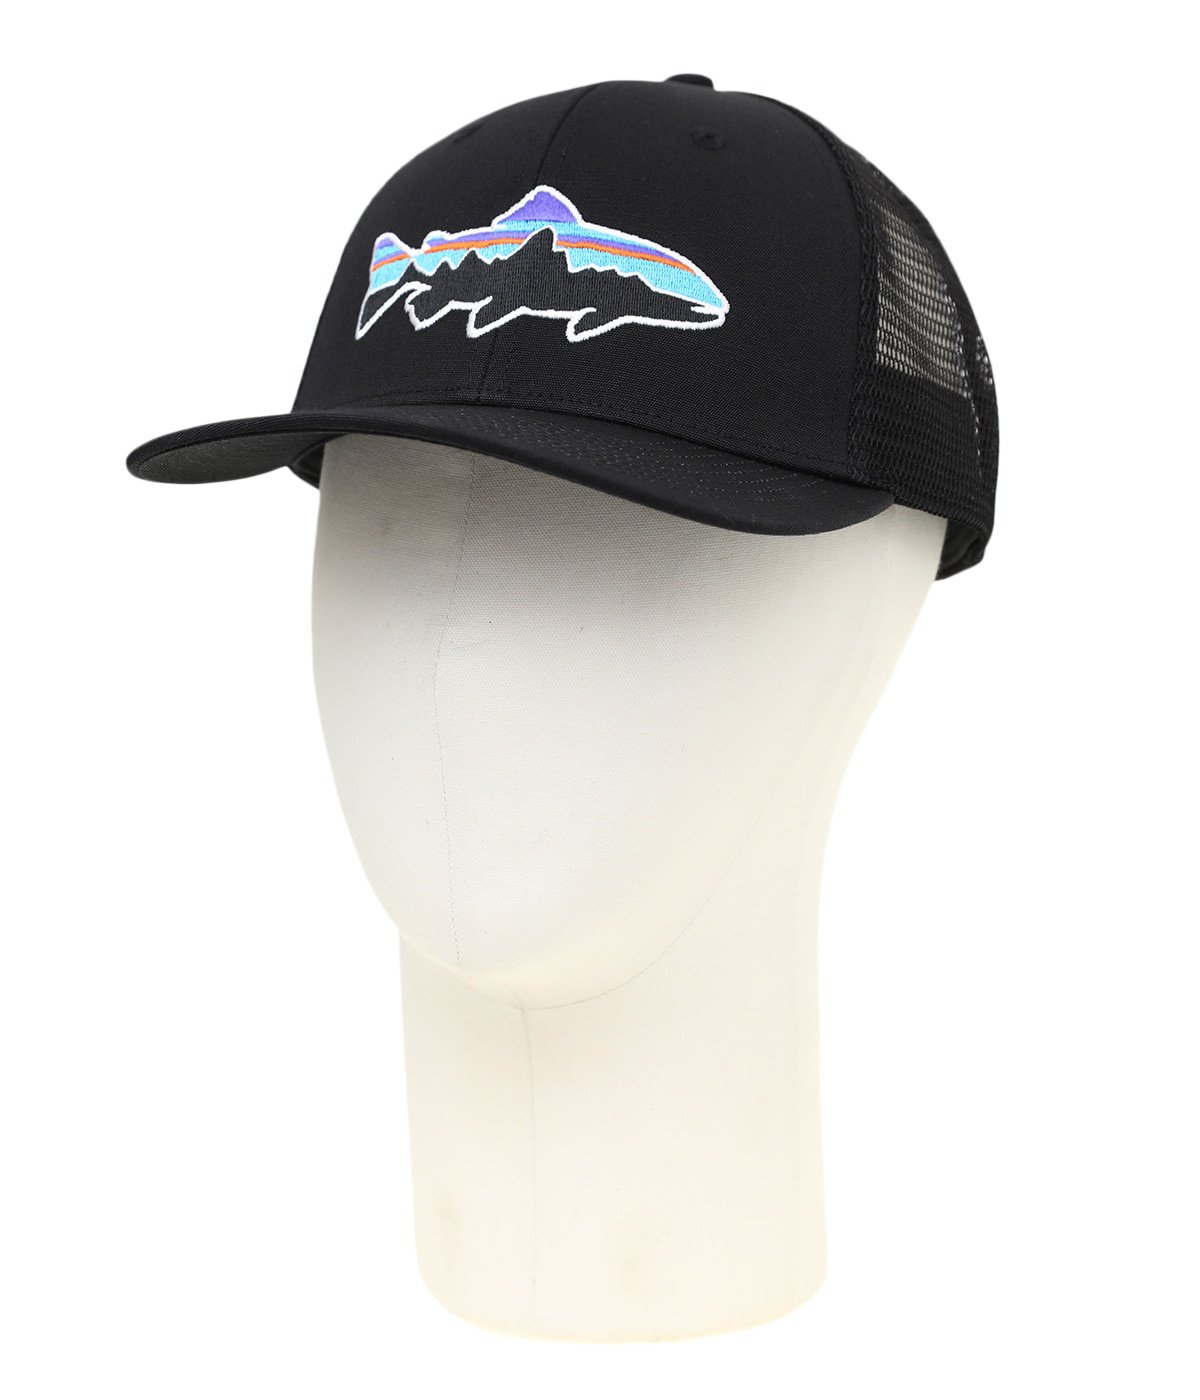 Fitz Roy Trout Trucker Hat -BLK- | patagonia(パタゴニア) / 帽子 